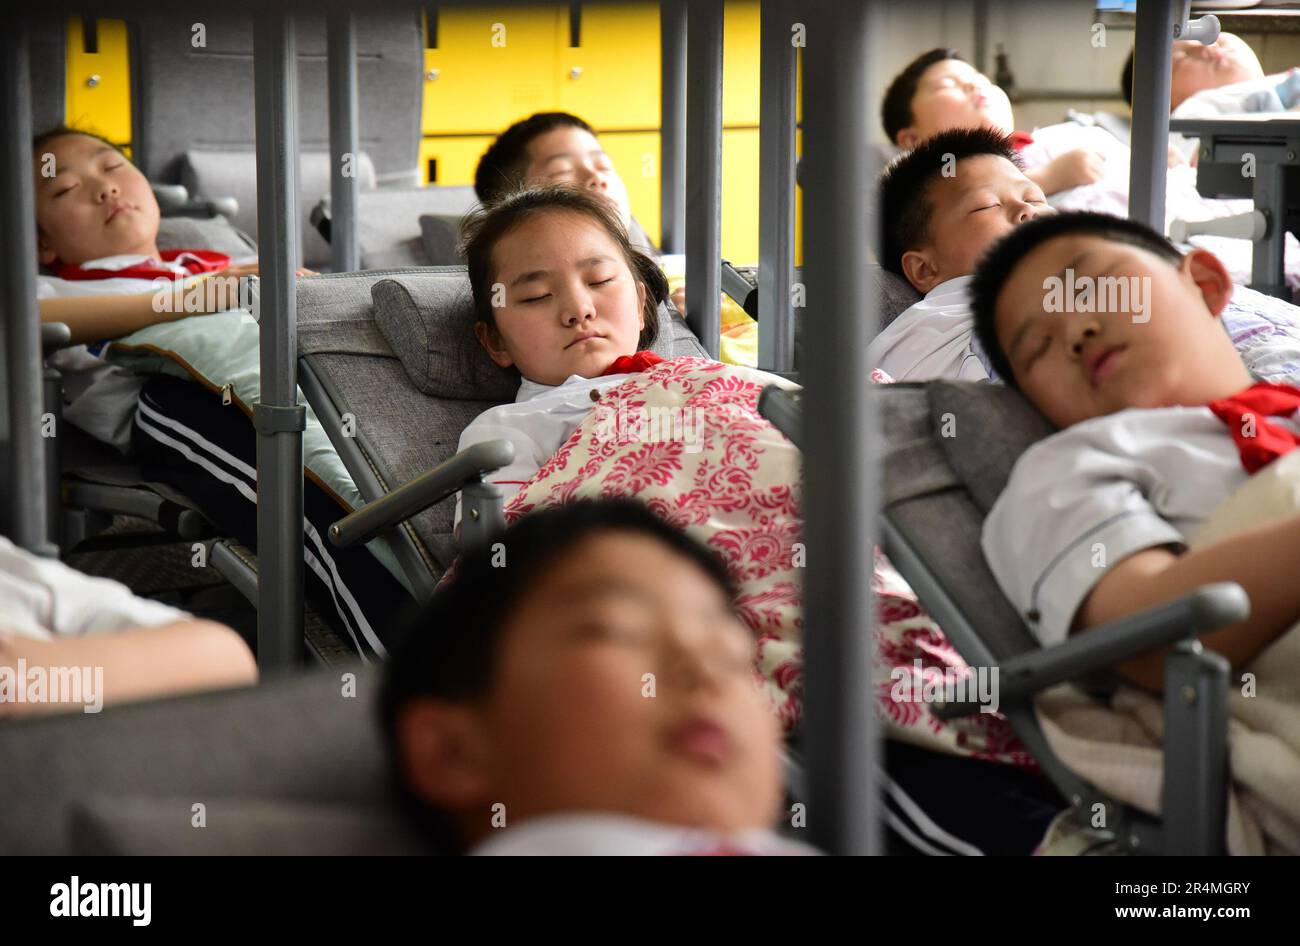 HANDAN, CHINA - MAY 29, 2023 - Primary school students use 'reclining desks and chairs' for lunch break in Handan, Hebei province, China, May 29, 2023 Stock Photo